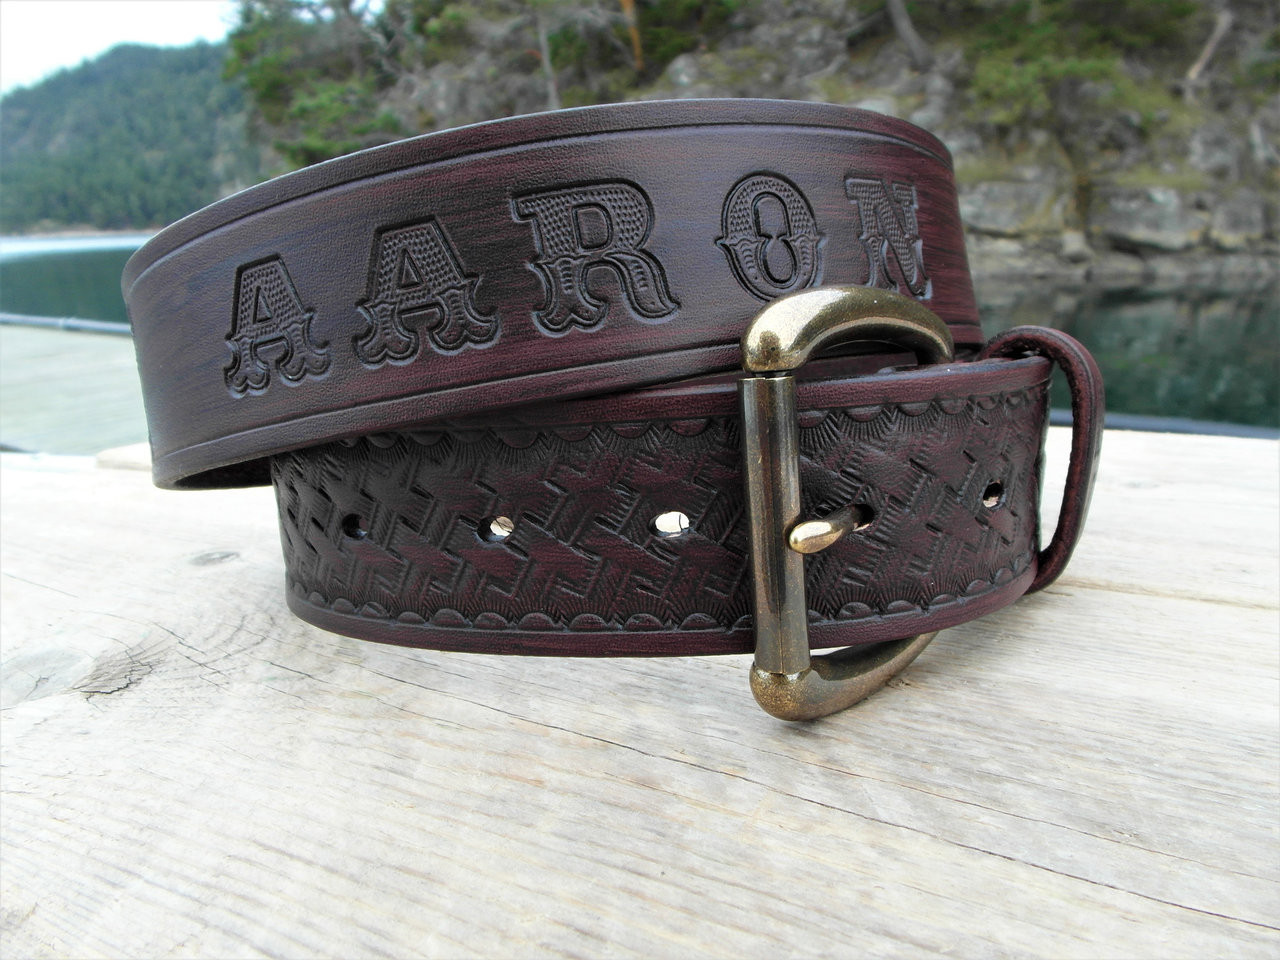 Personalized Fancy Cut-Out Leather Name Belt - Peronalized Custom Handmade Leather Belt Natural Leather w/ Painted Nature Scene / Half Oval - Brass